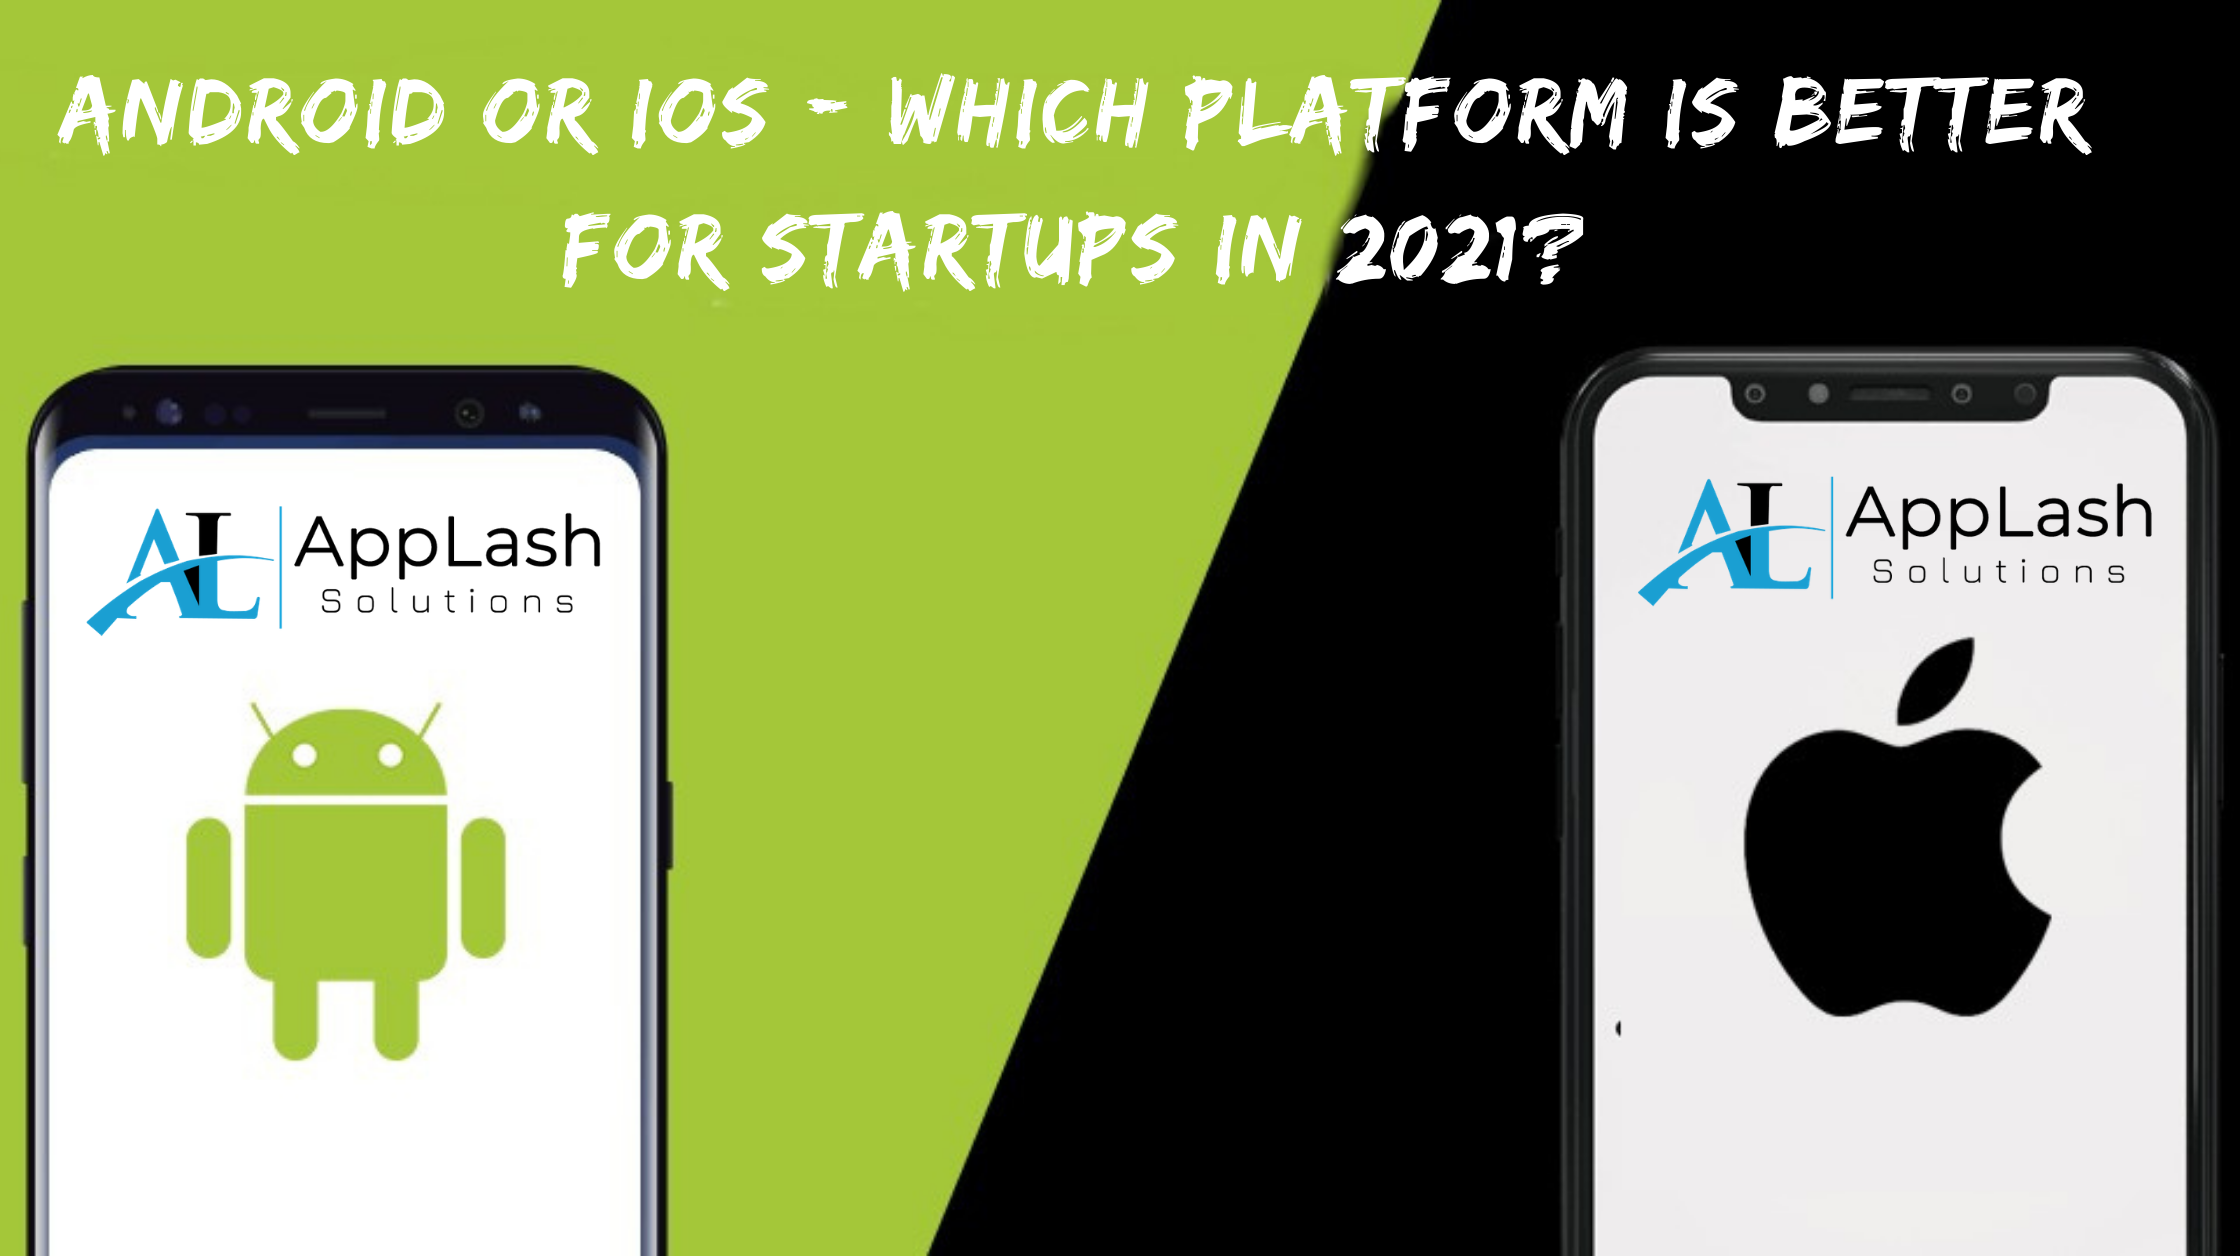 Android or iOS – Which Platform is better for Startups in 2021?